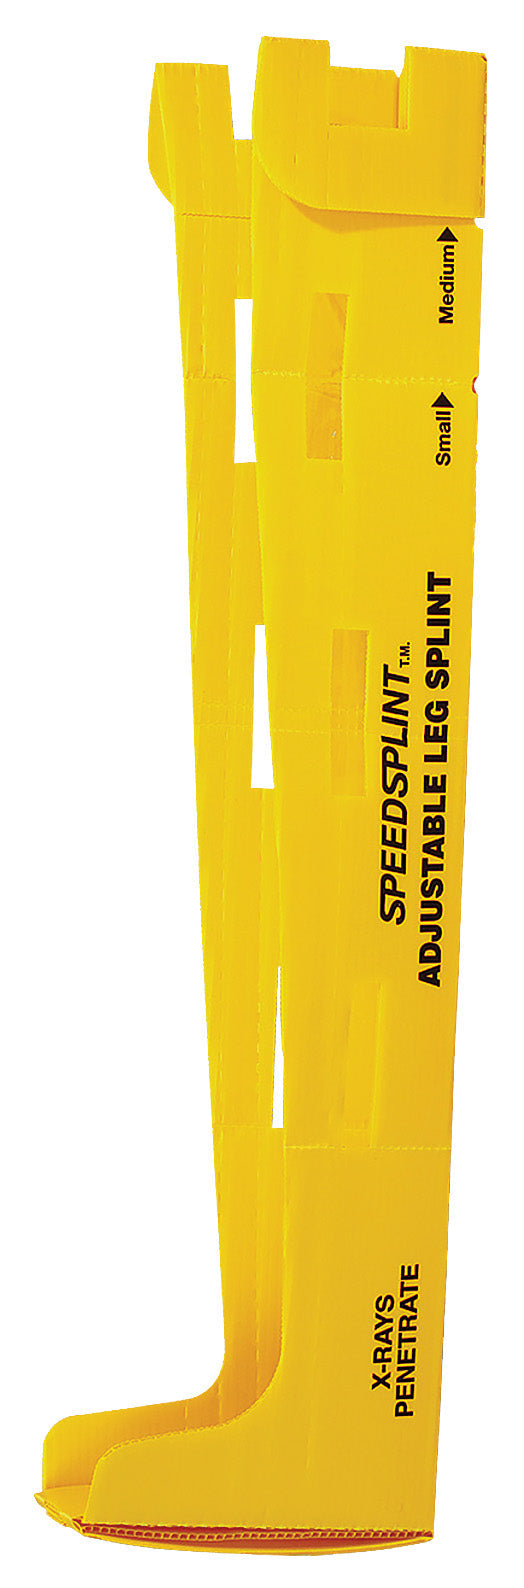 91387 First Aid Only Adjustable Leg Speed Splint - Sold per Each